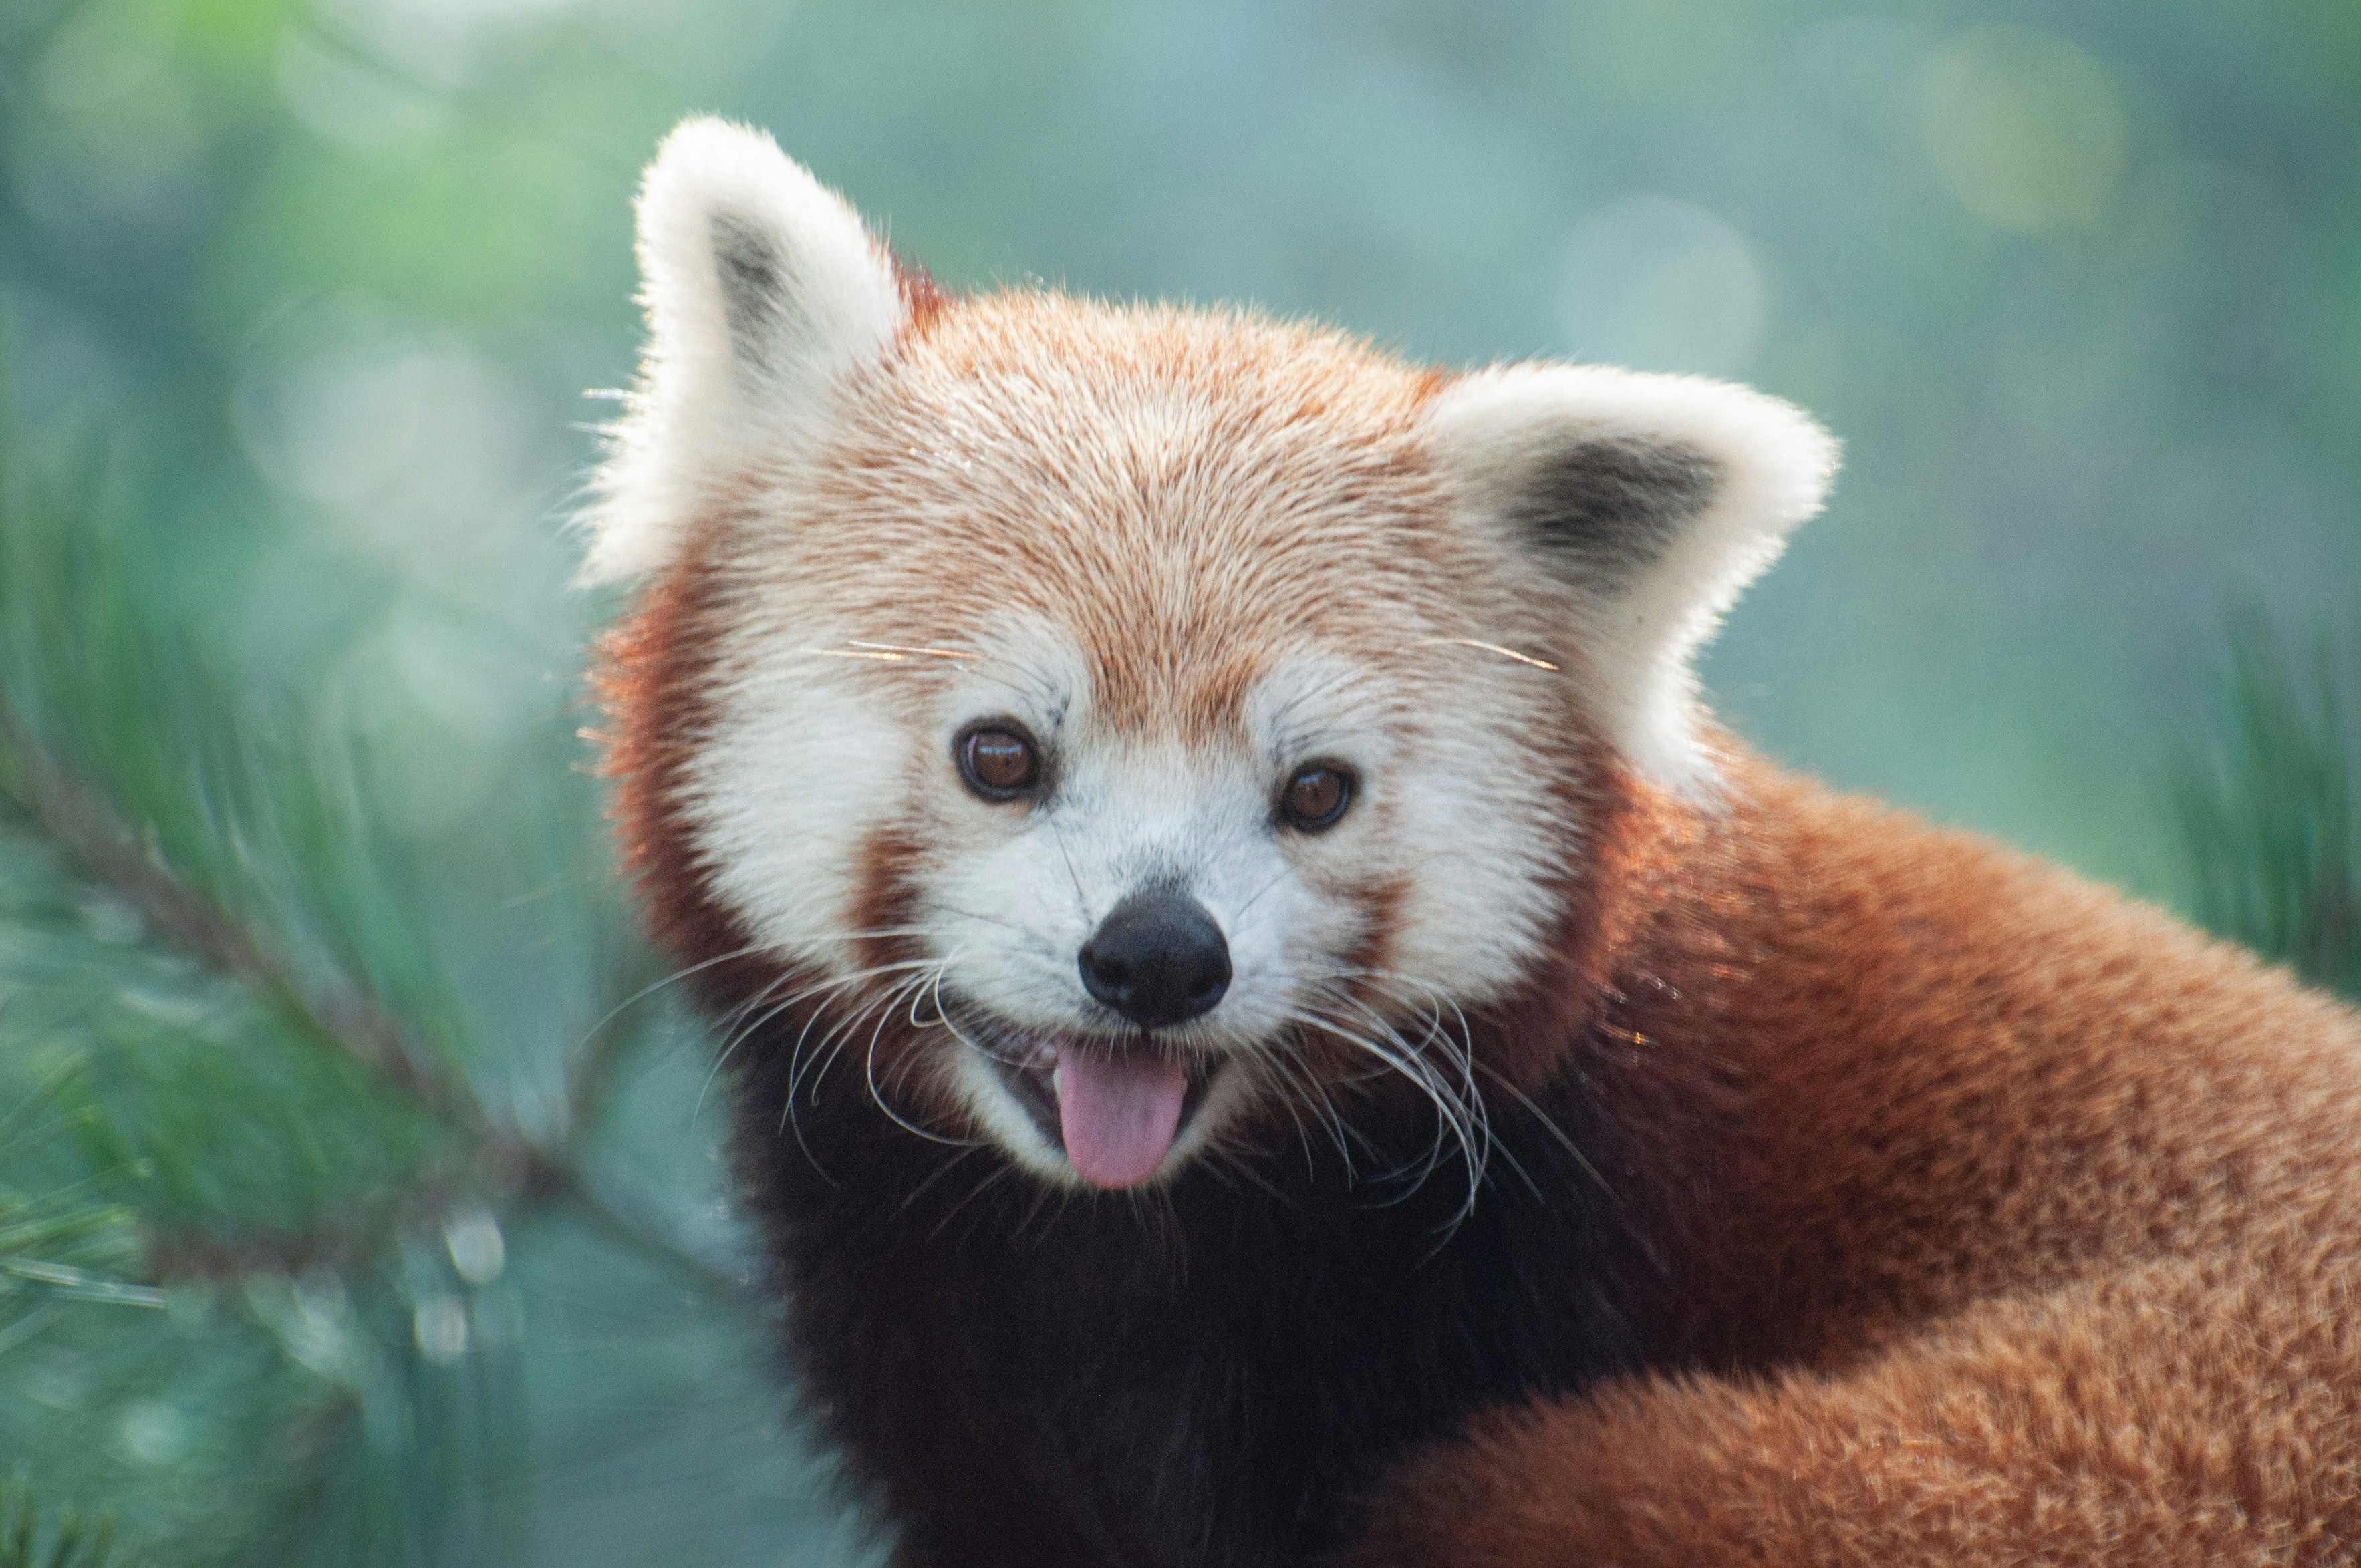 A red panda against a green background. It looks as if it is smiling. The tongue can be seen.